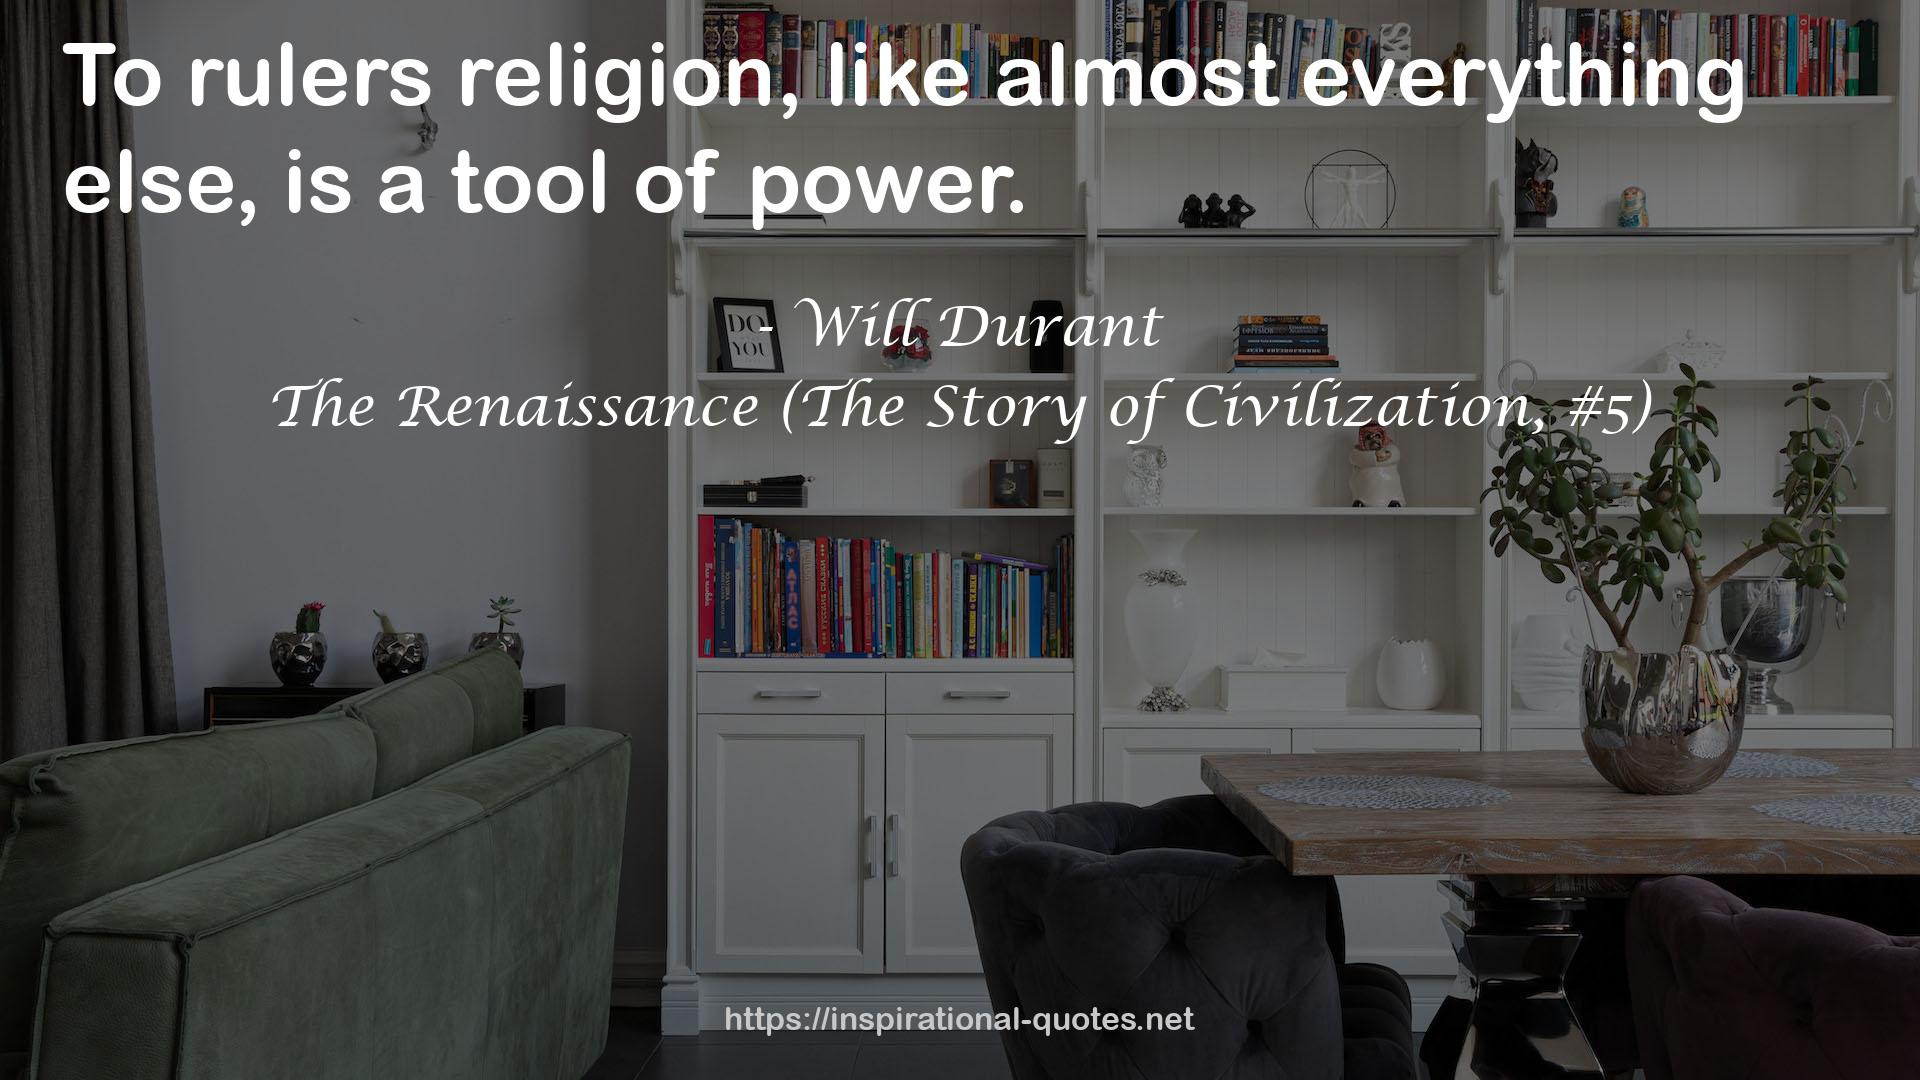 The Renaissance (The Story of Civilization, #5) QUOTES